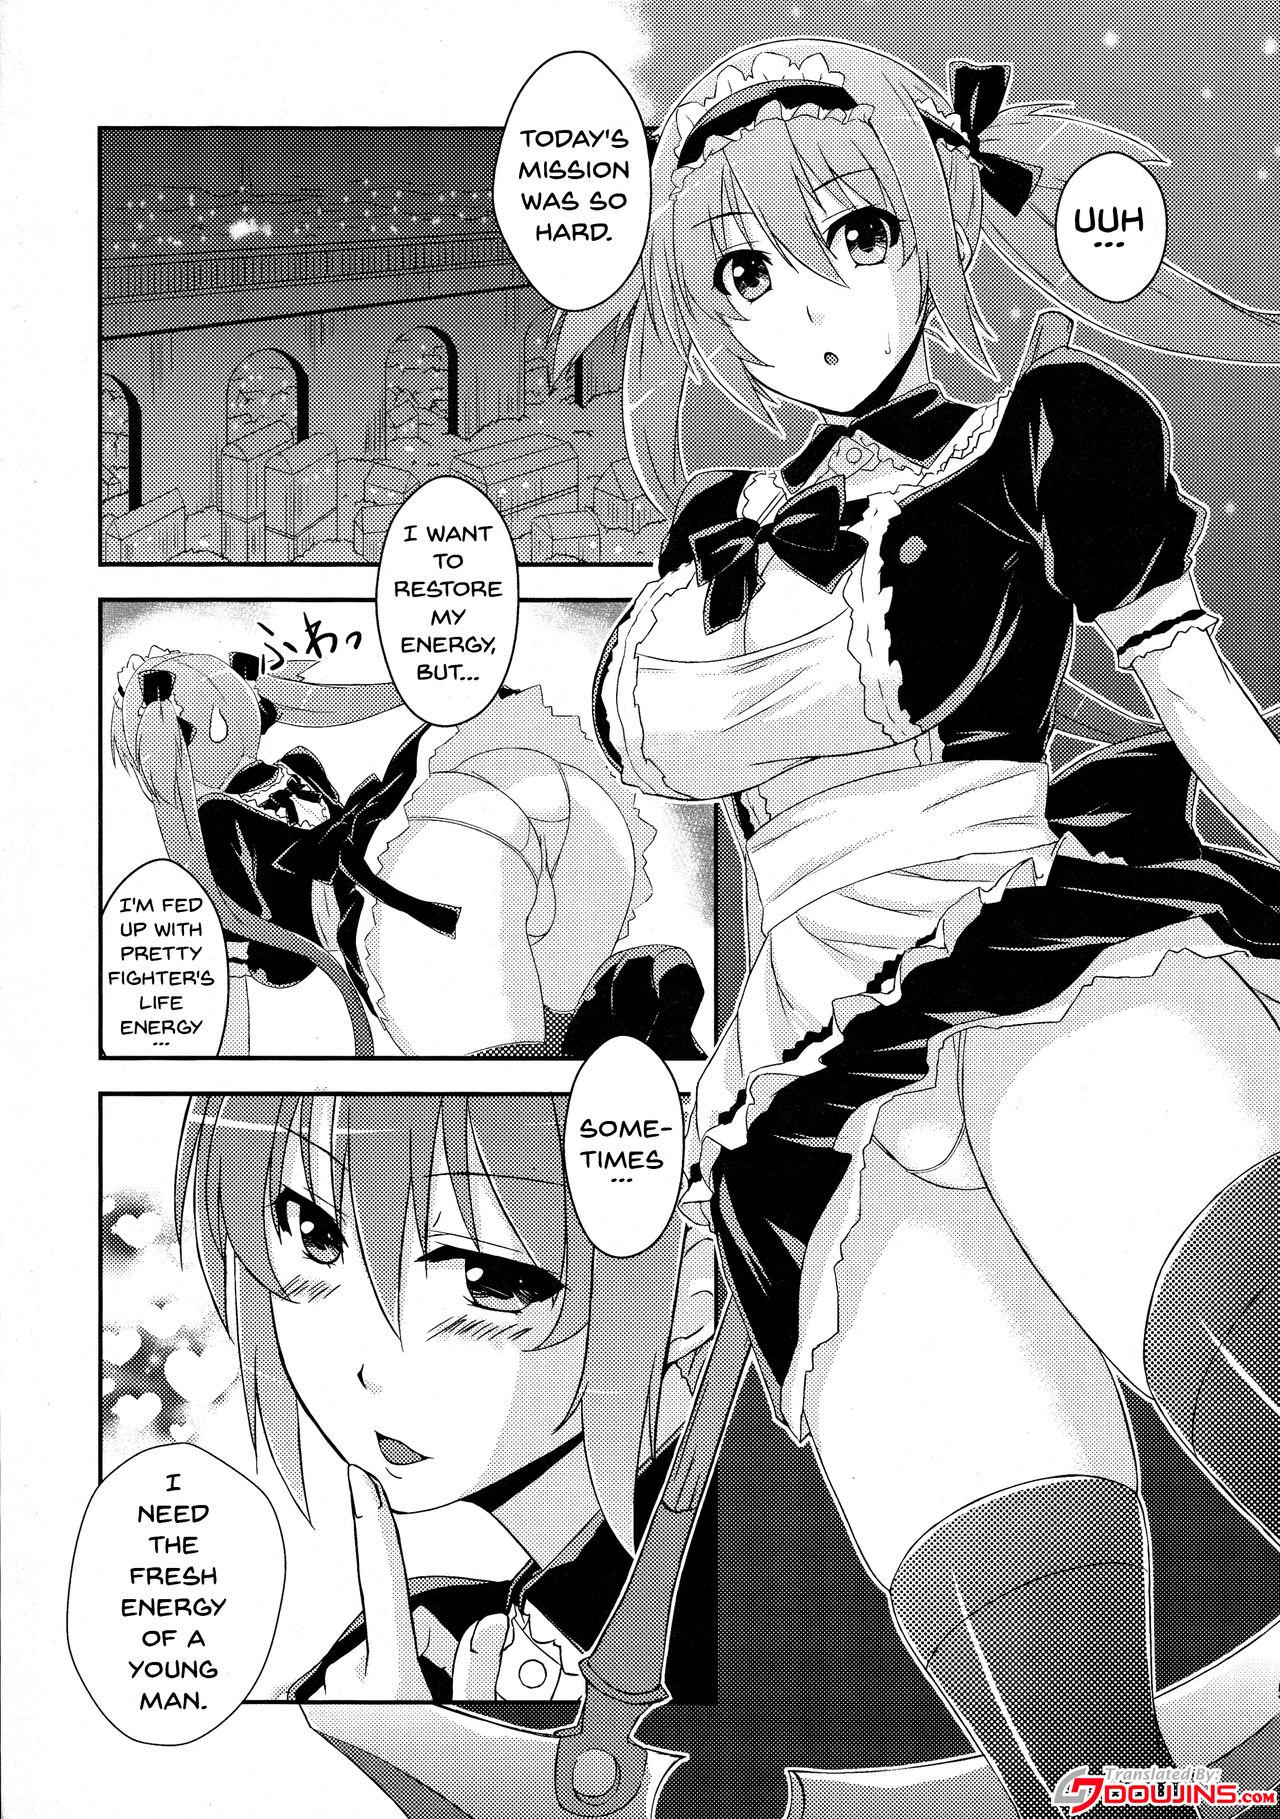 Stockings Queen's Usuihon - Queens blade Vintage - Page 3